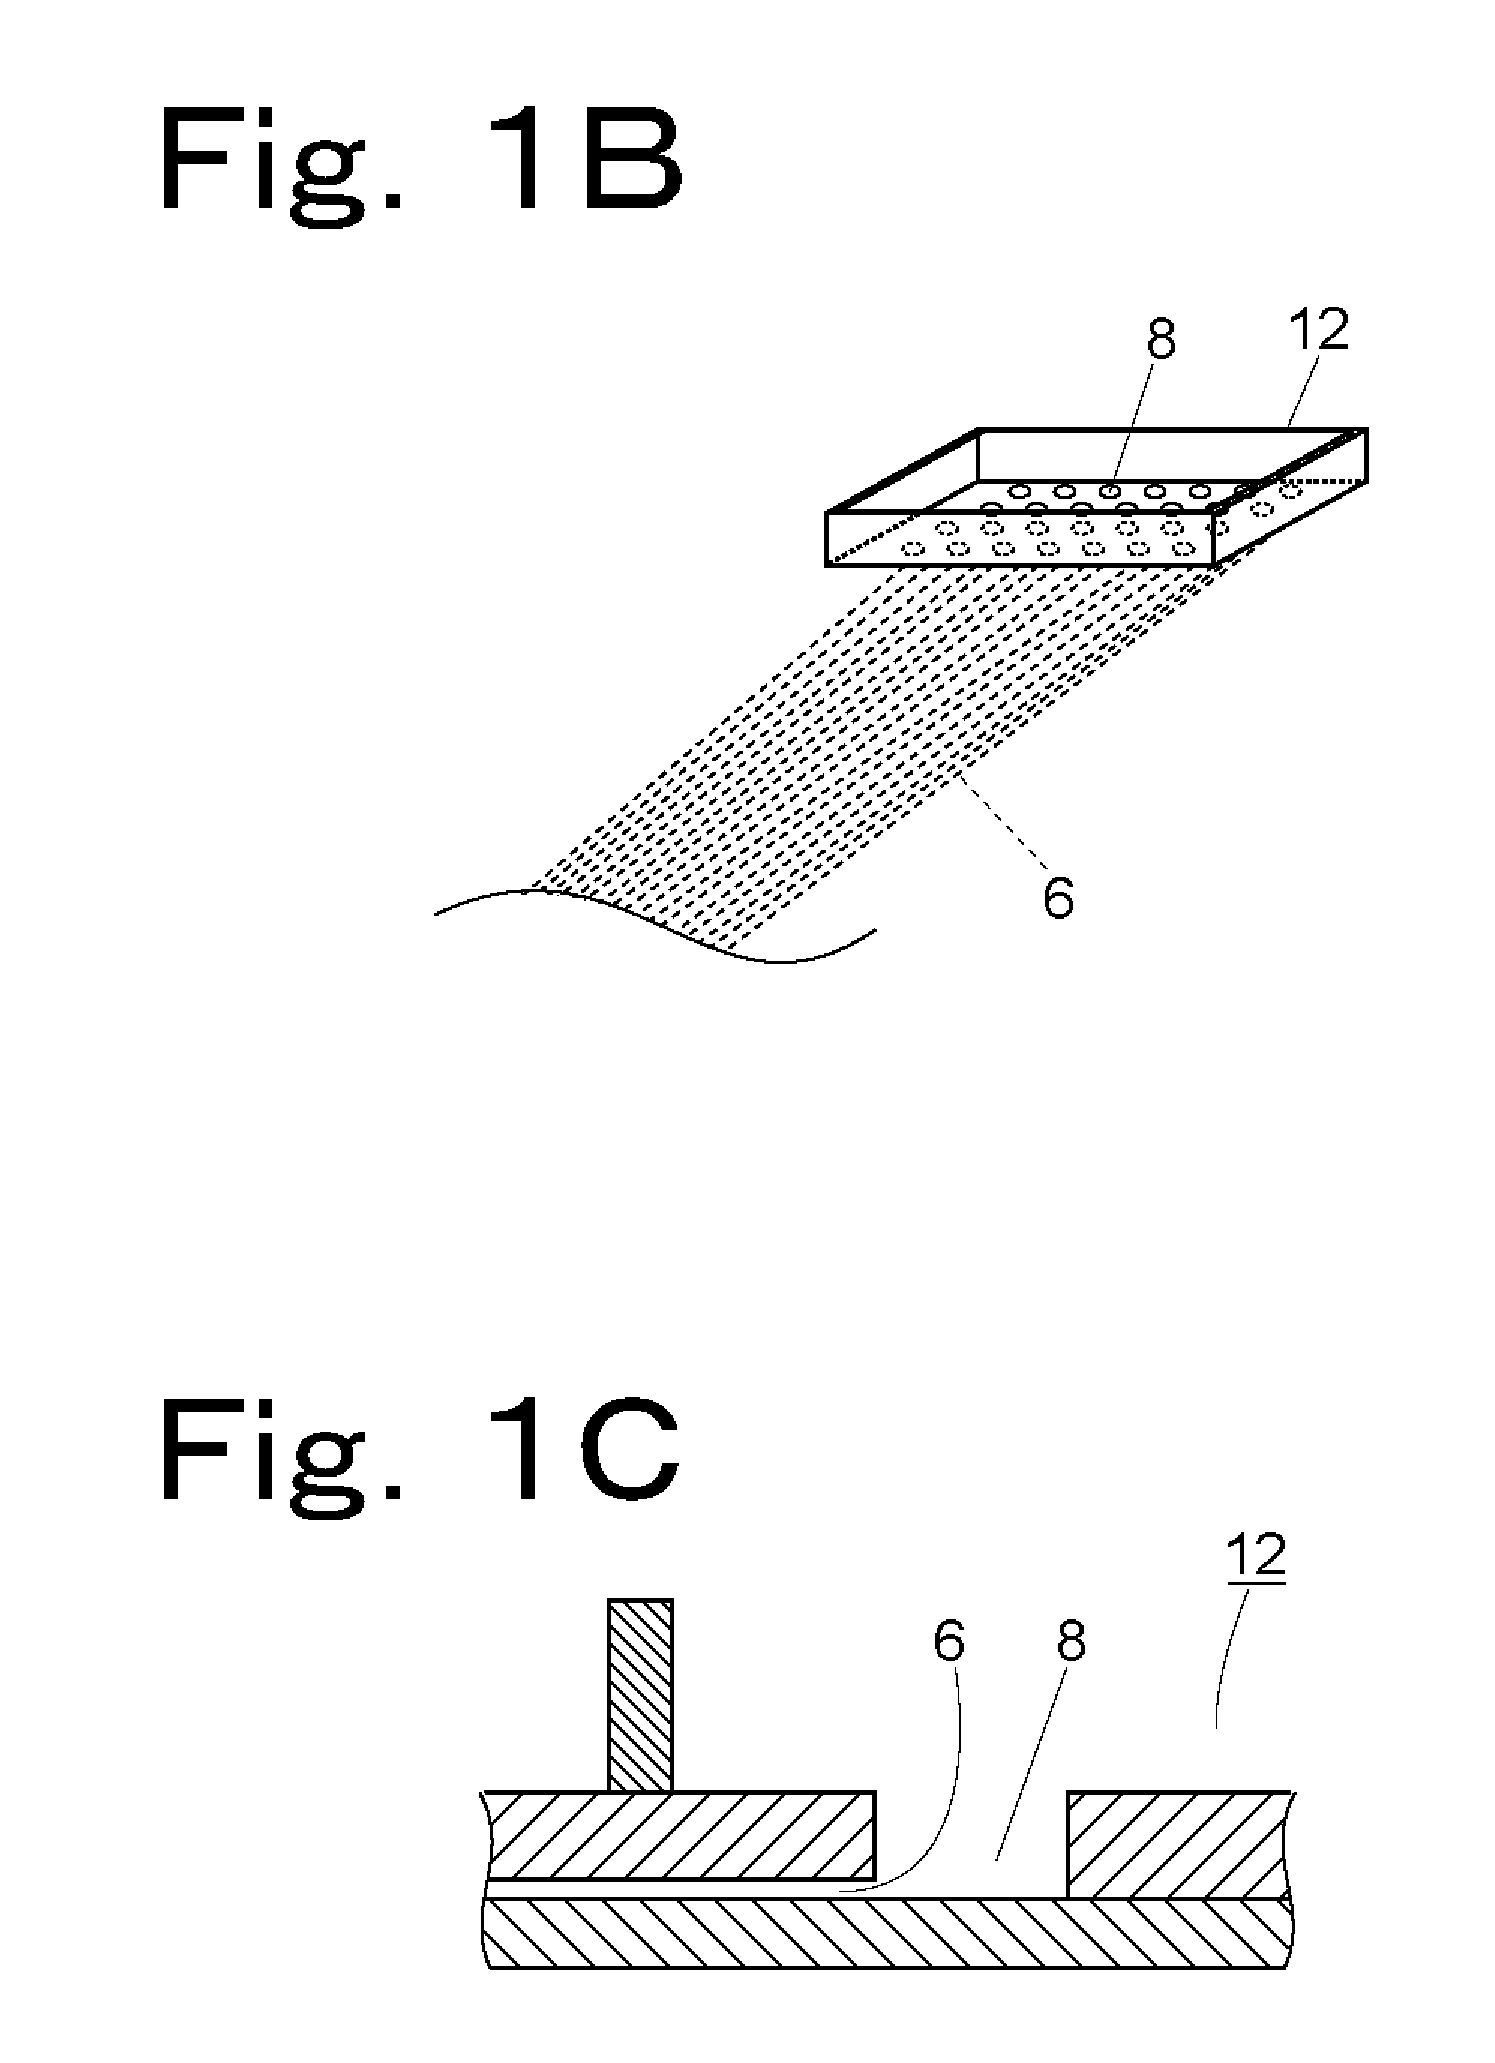 Method for pretreatment of electrophoresis, substrate for analysis, and pretreatment apparatus for electrophoresis